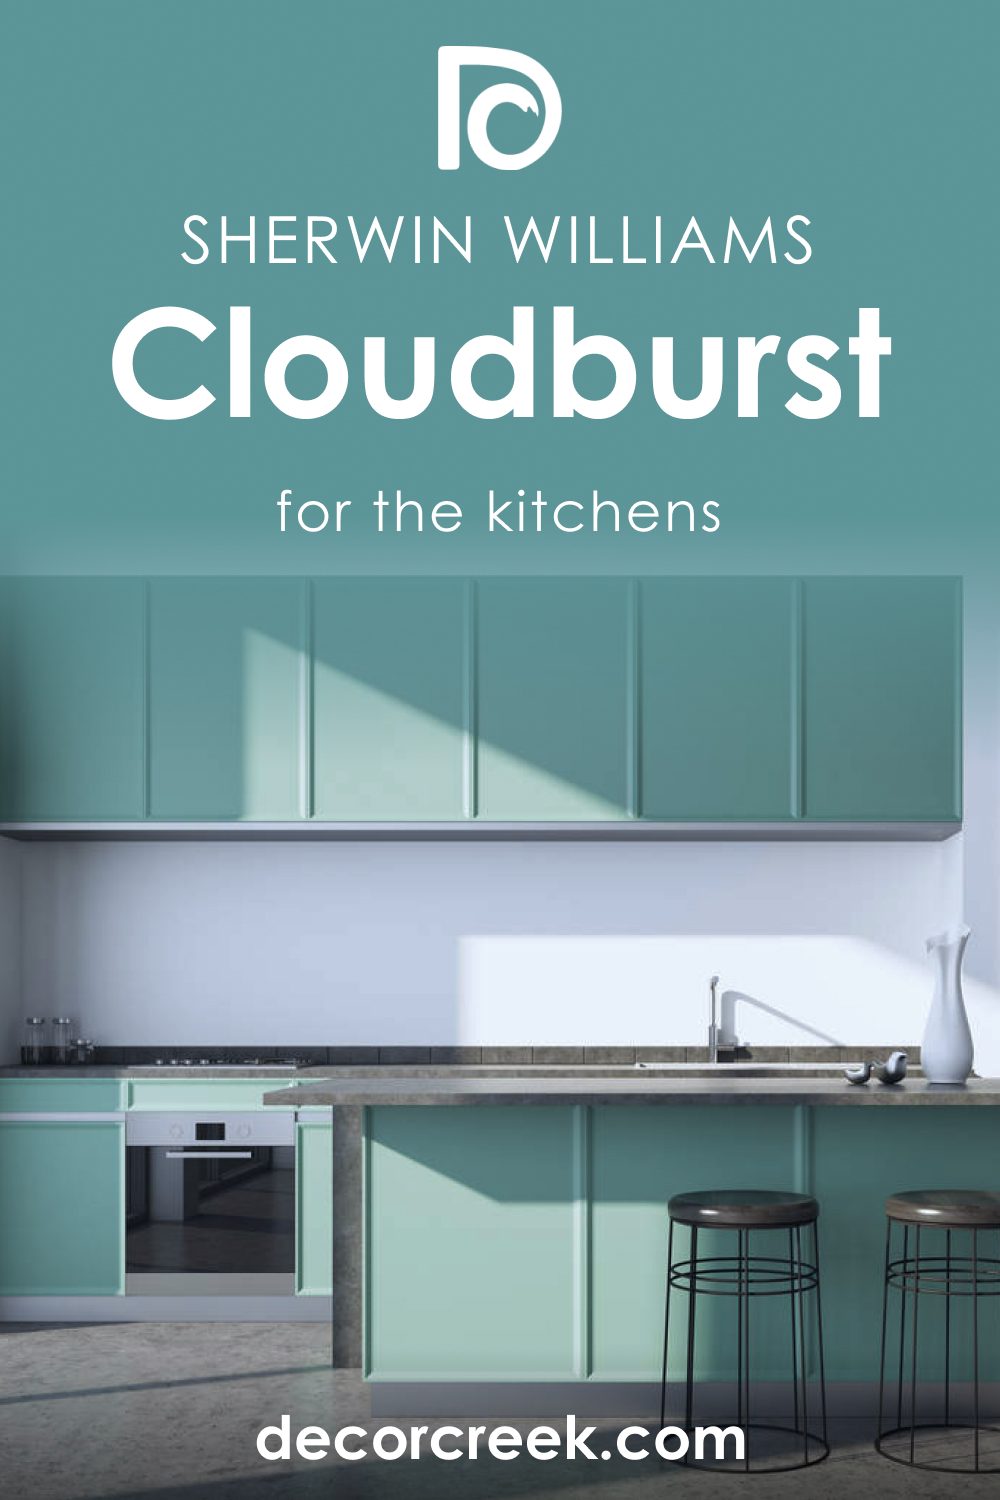 How to Use SW 6487 Cloudburst in the Kitchen?